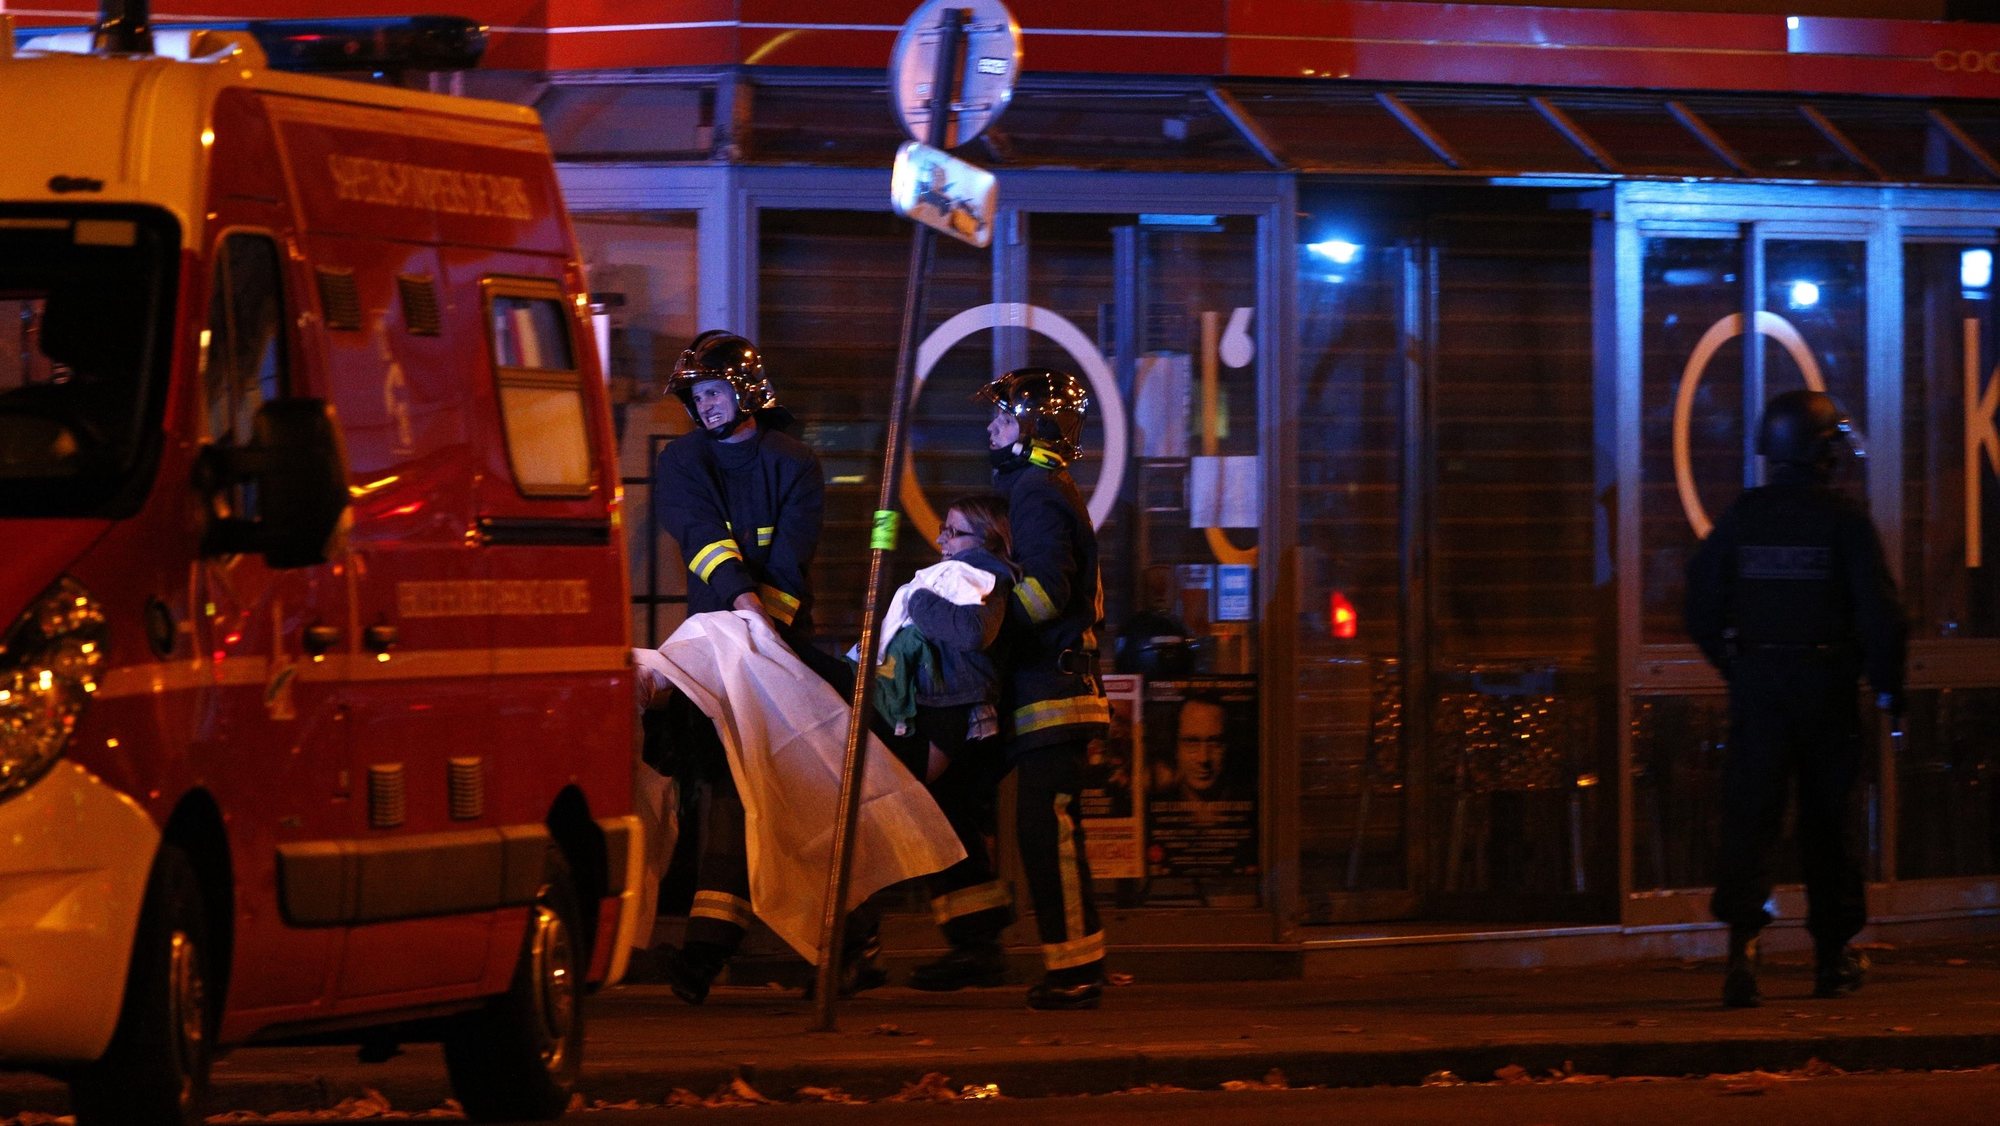 epa05023913 Wounded people are evacuated outside the scene of a hostage situation at the Bataclan theatre in Paris, France, 13 November 2015. At least 60 people have been killed in a series of attacks in the French capital Paris, with a hostage-taking also reported at a concert hall.  EPA/YOAN VALAT